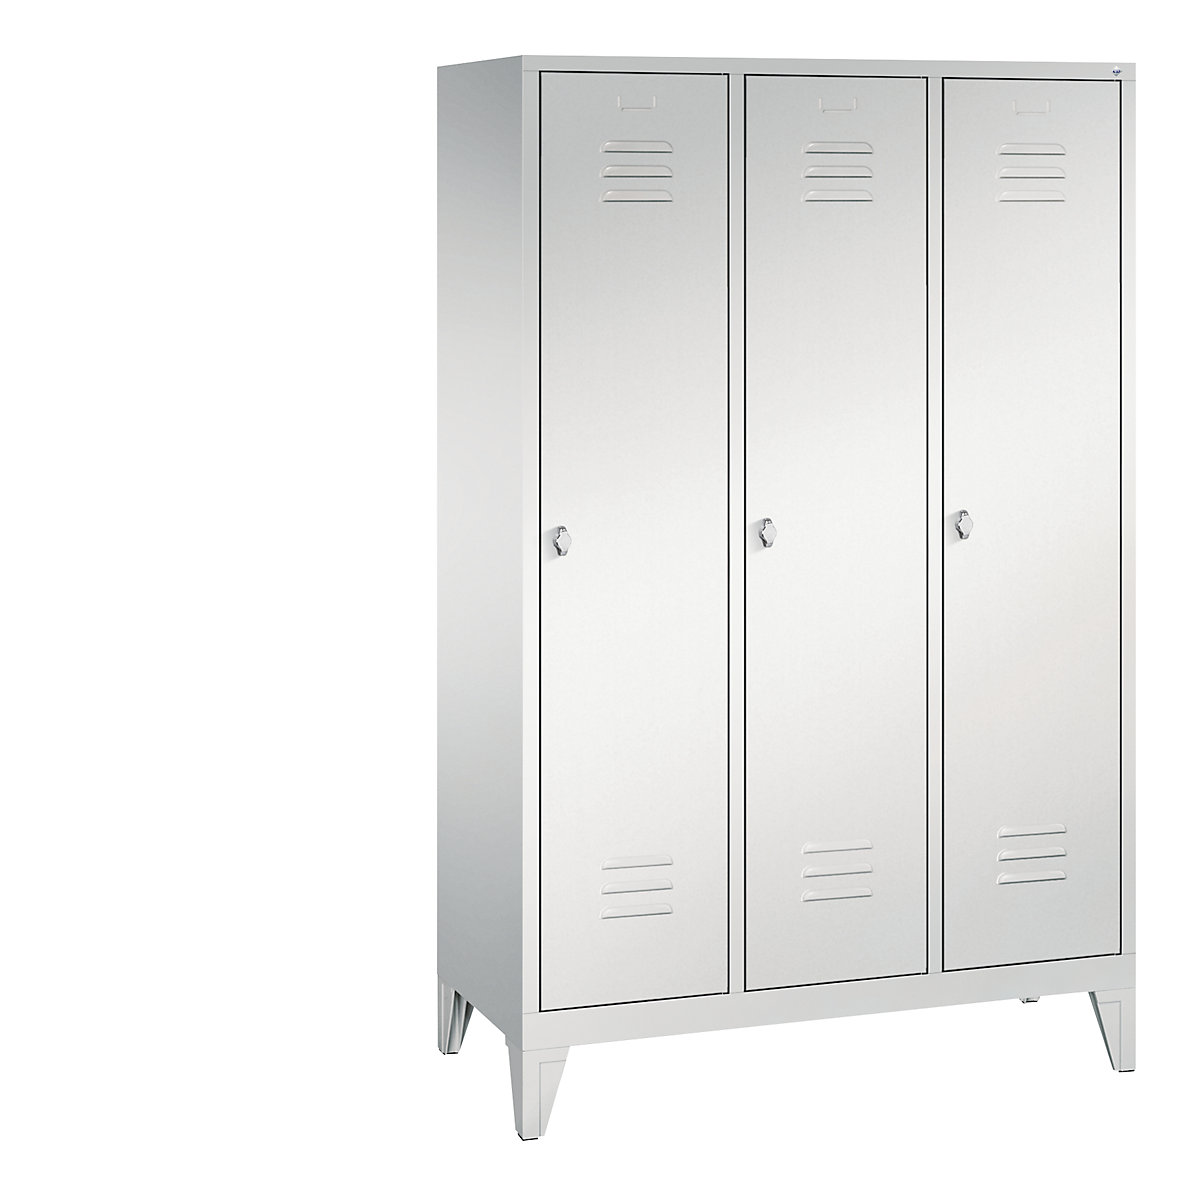 CLASSIC cloakroom locker with feet – C+P, 3 compartments, compartment width 400 mm, light grey-9